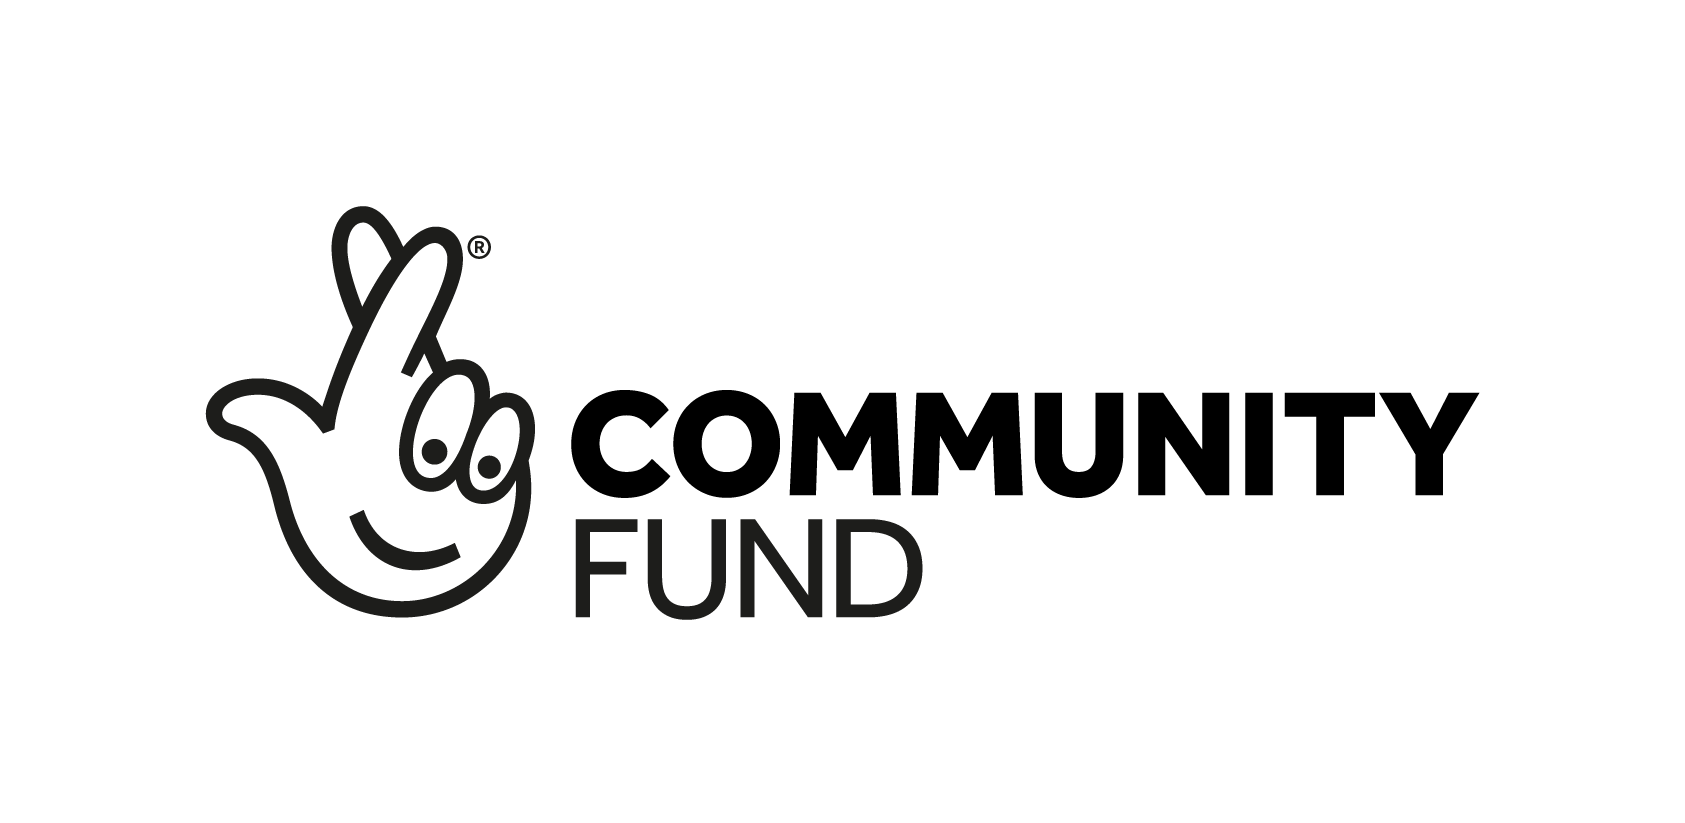 The Lottery Community Fund